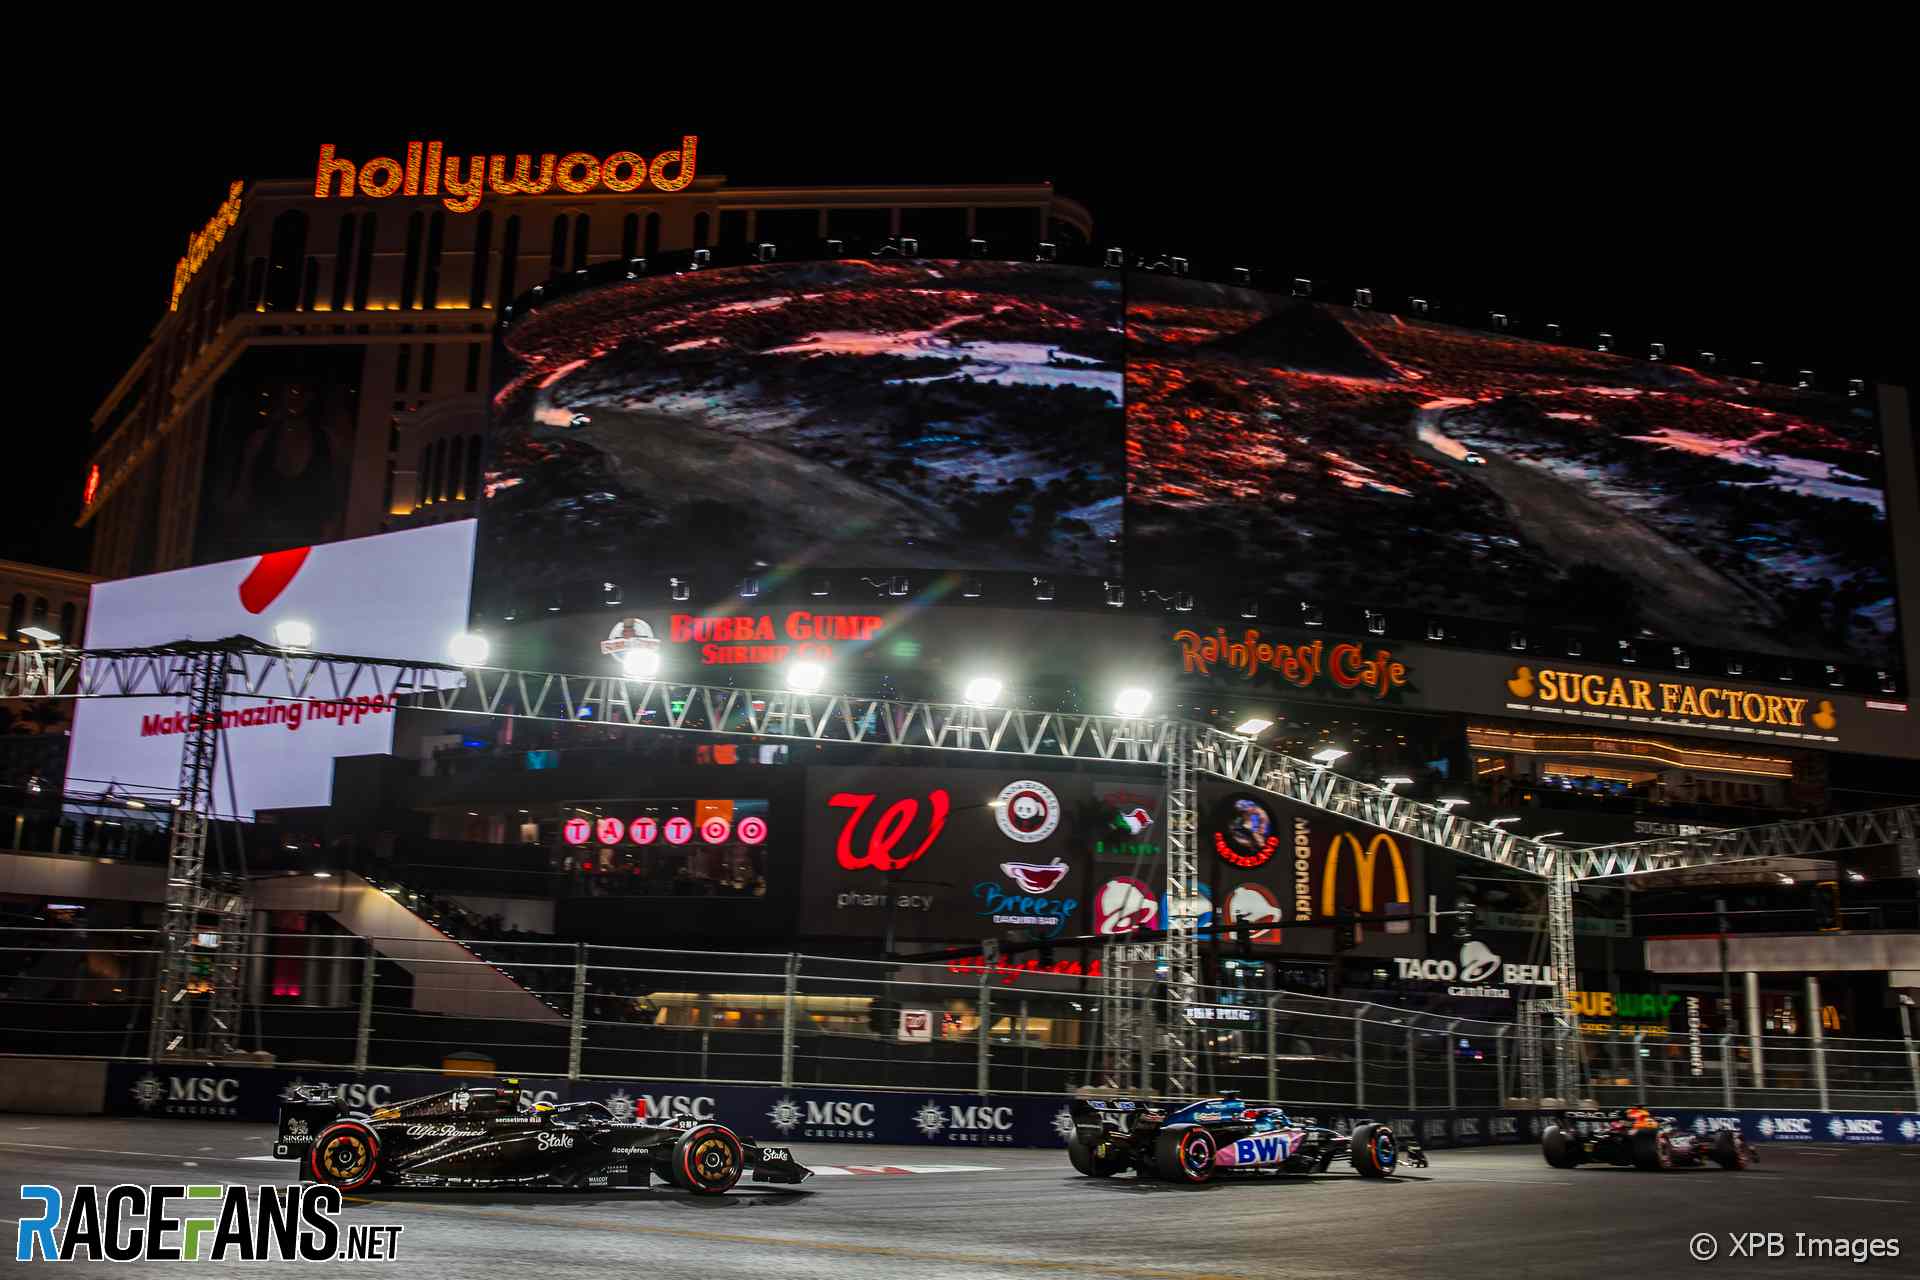 RaceFans Round-up: Las Vegas residents support F1 race